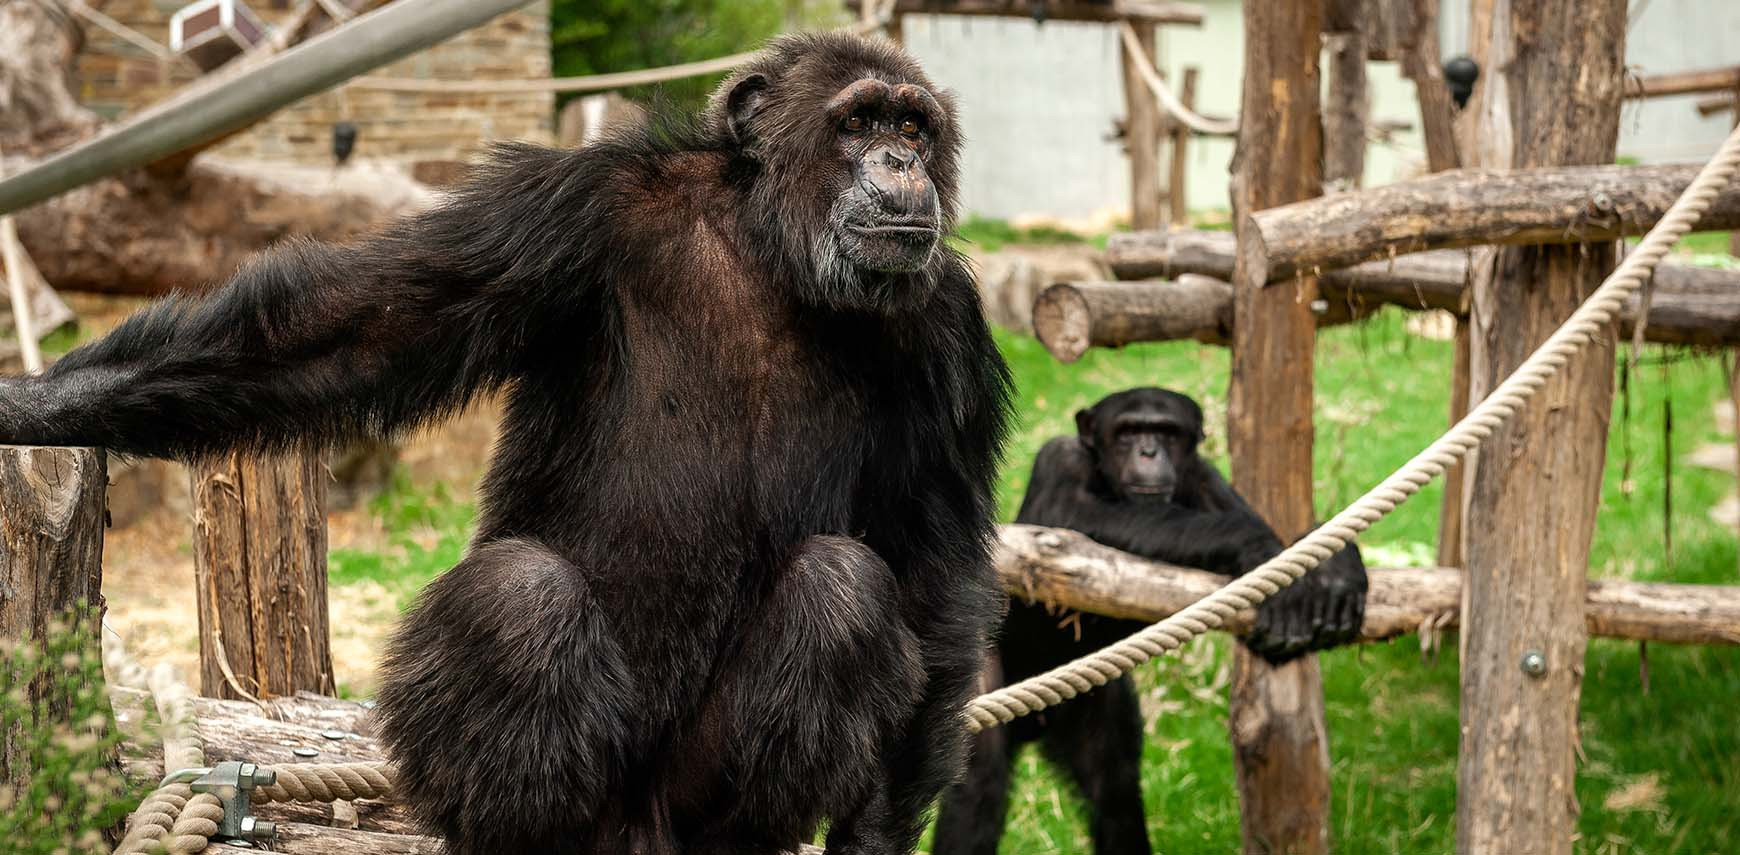 Chimpanzee politics with crucial coalitions